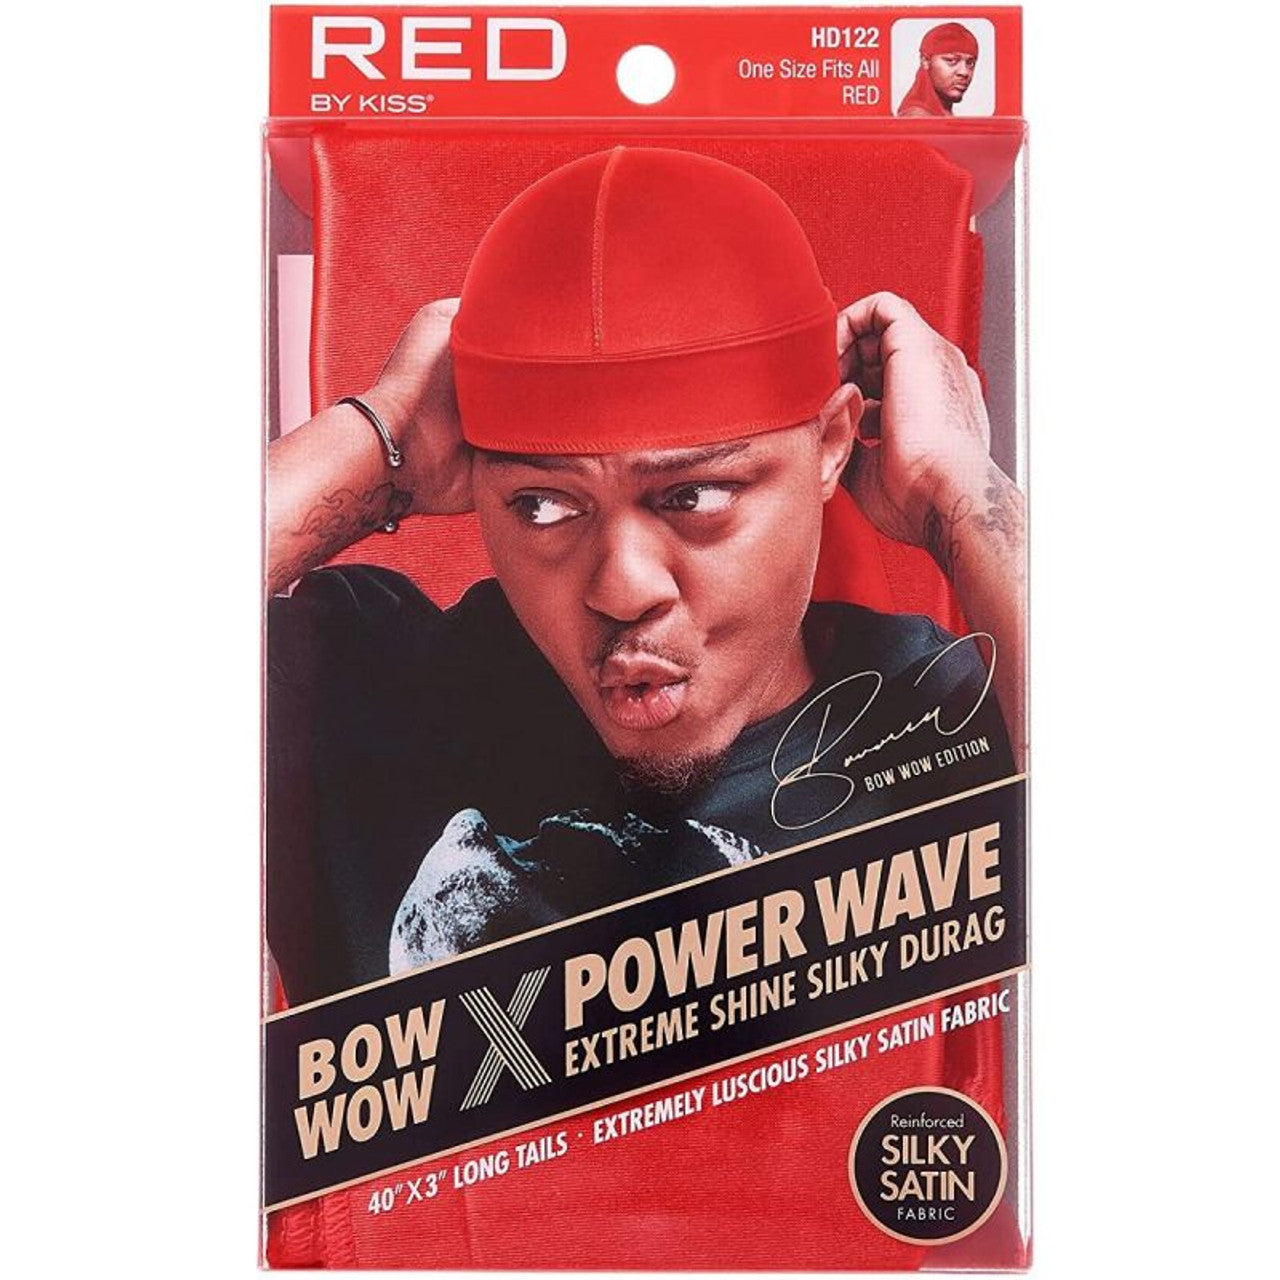 Red by Kiss Bow Wow X Power Wave Extreme Shine Silky Durag - Red - #HD122